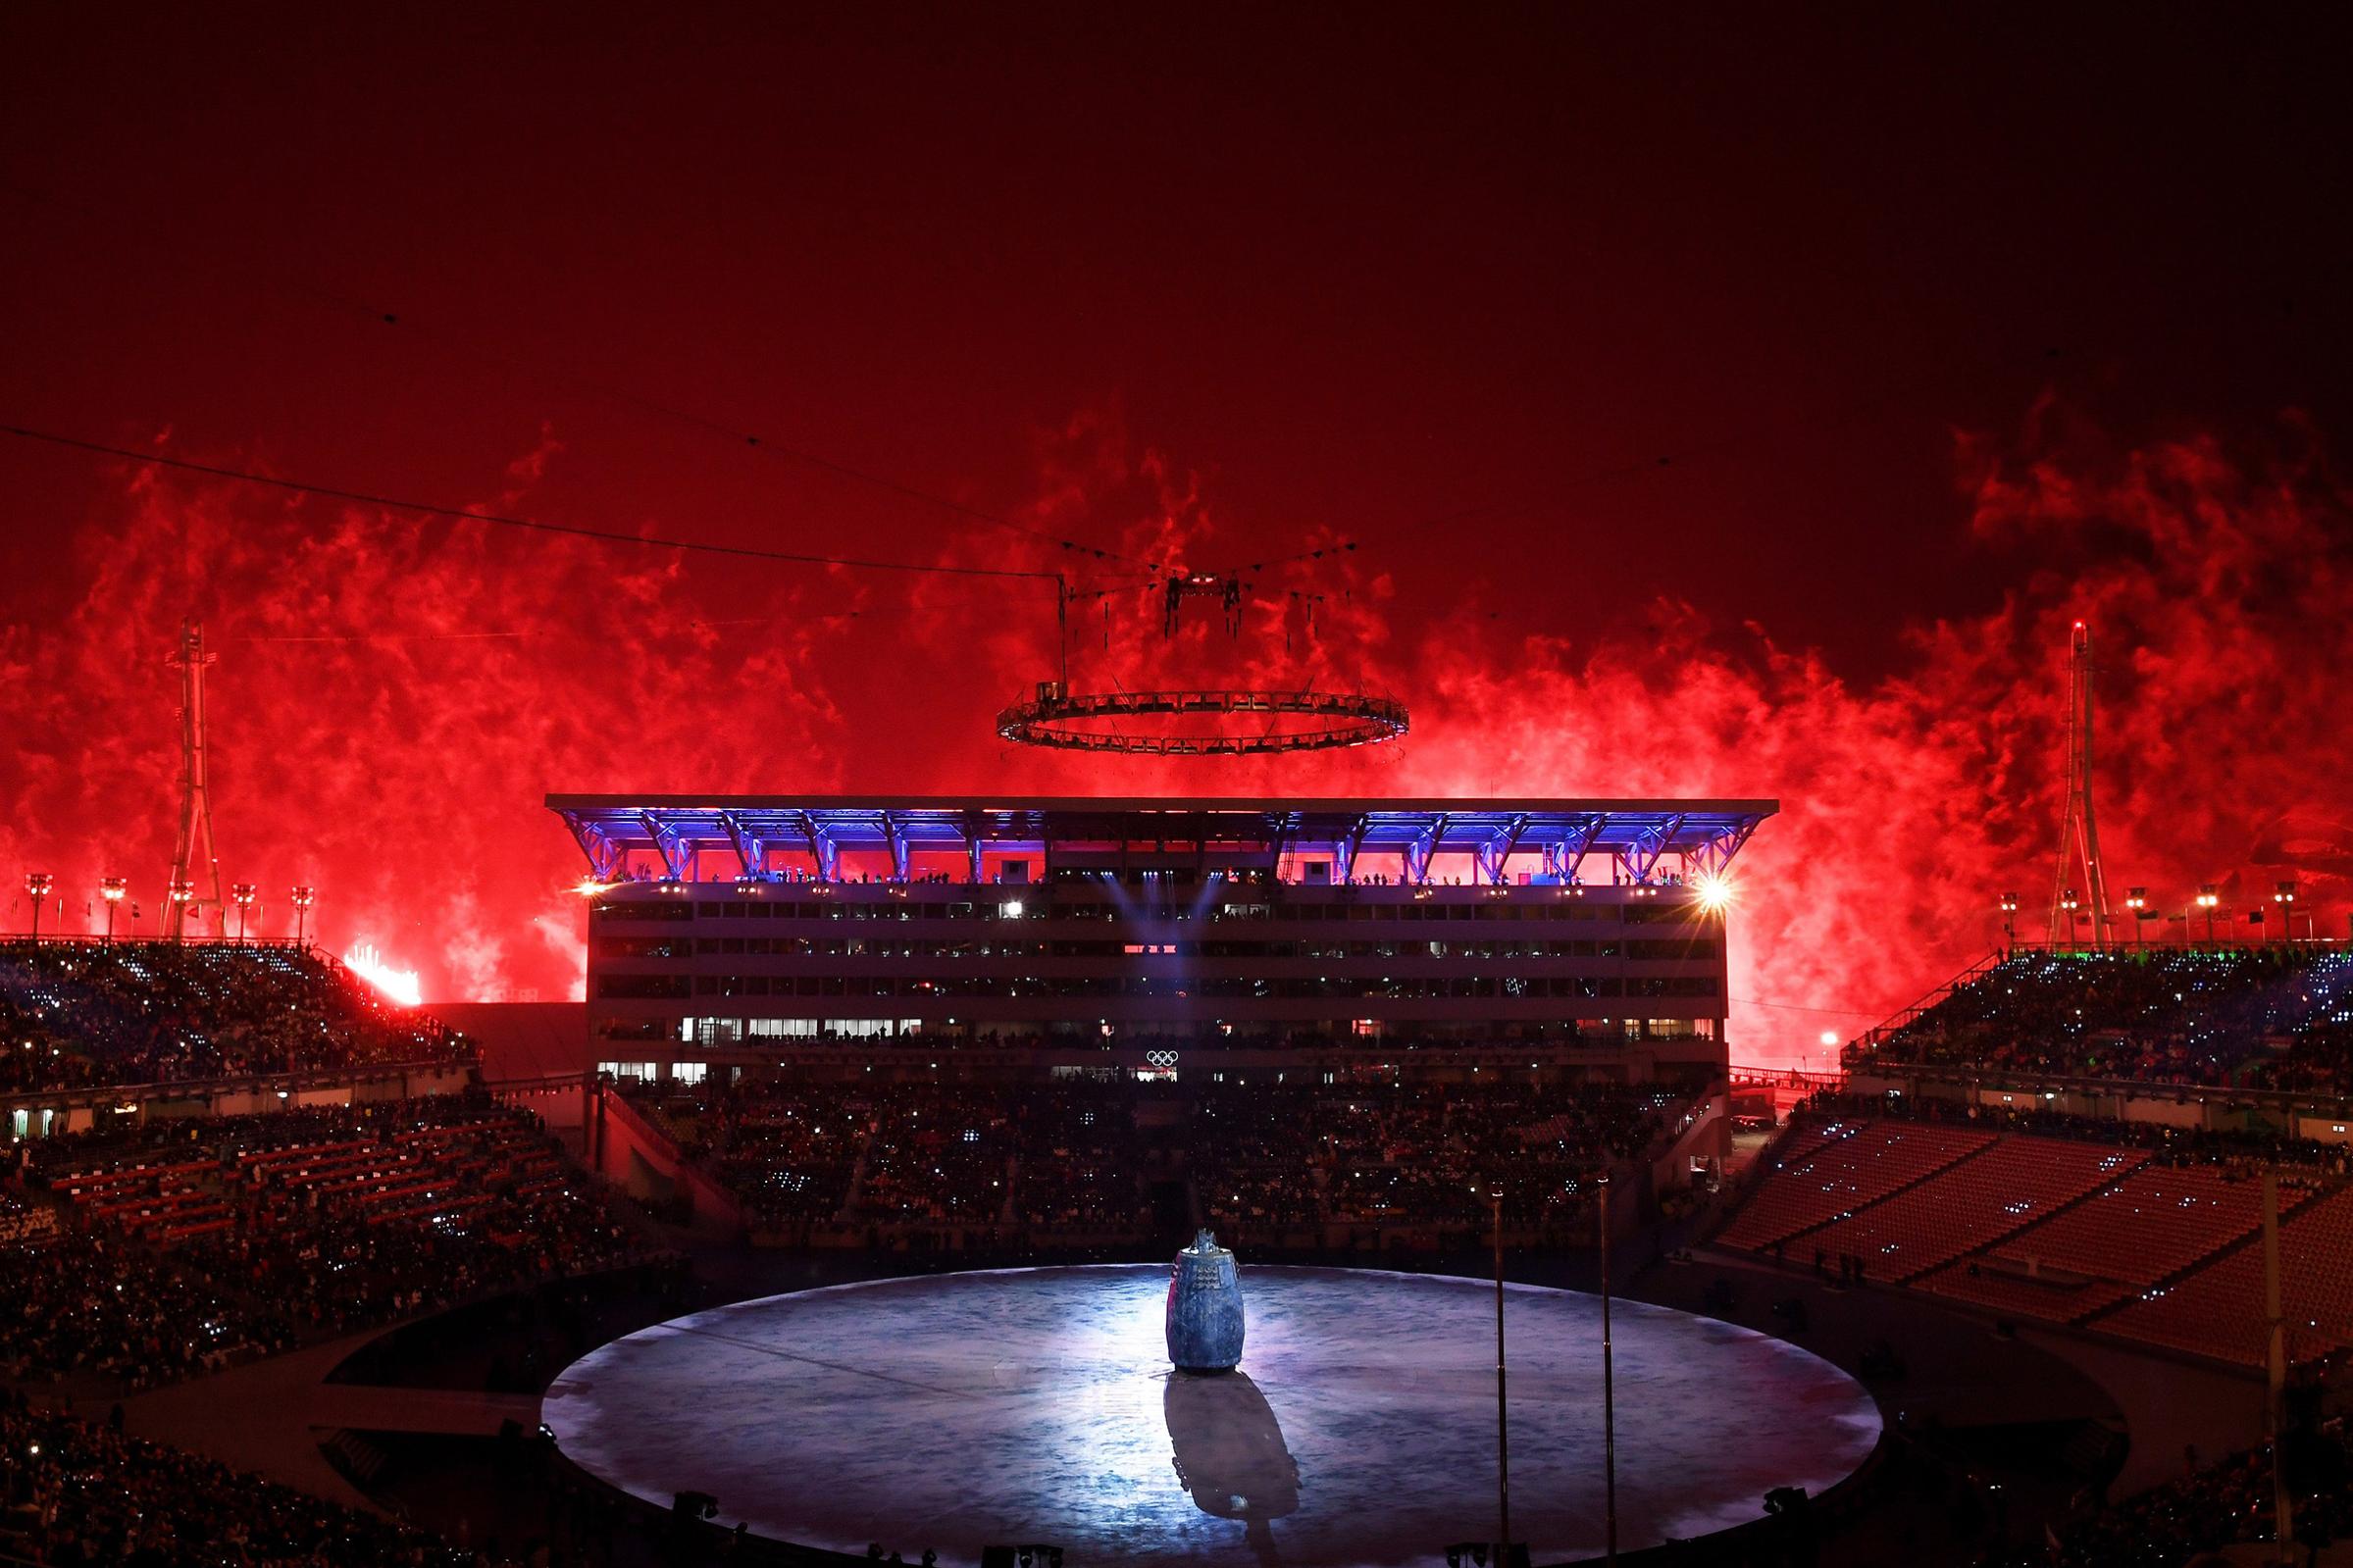 Fireworks erupt during the Opening Ceremony of the PyeongChang 2018 Winter Olympic Games.